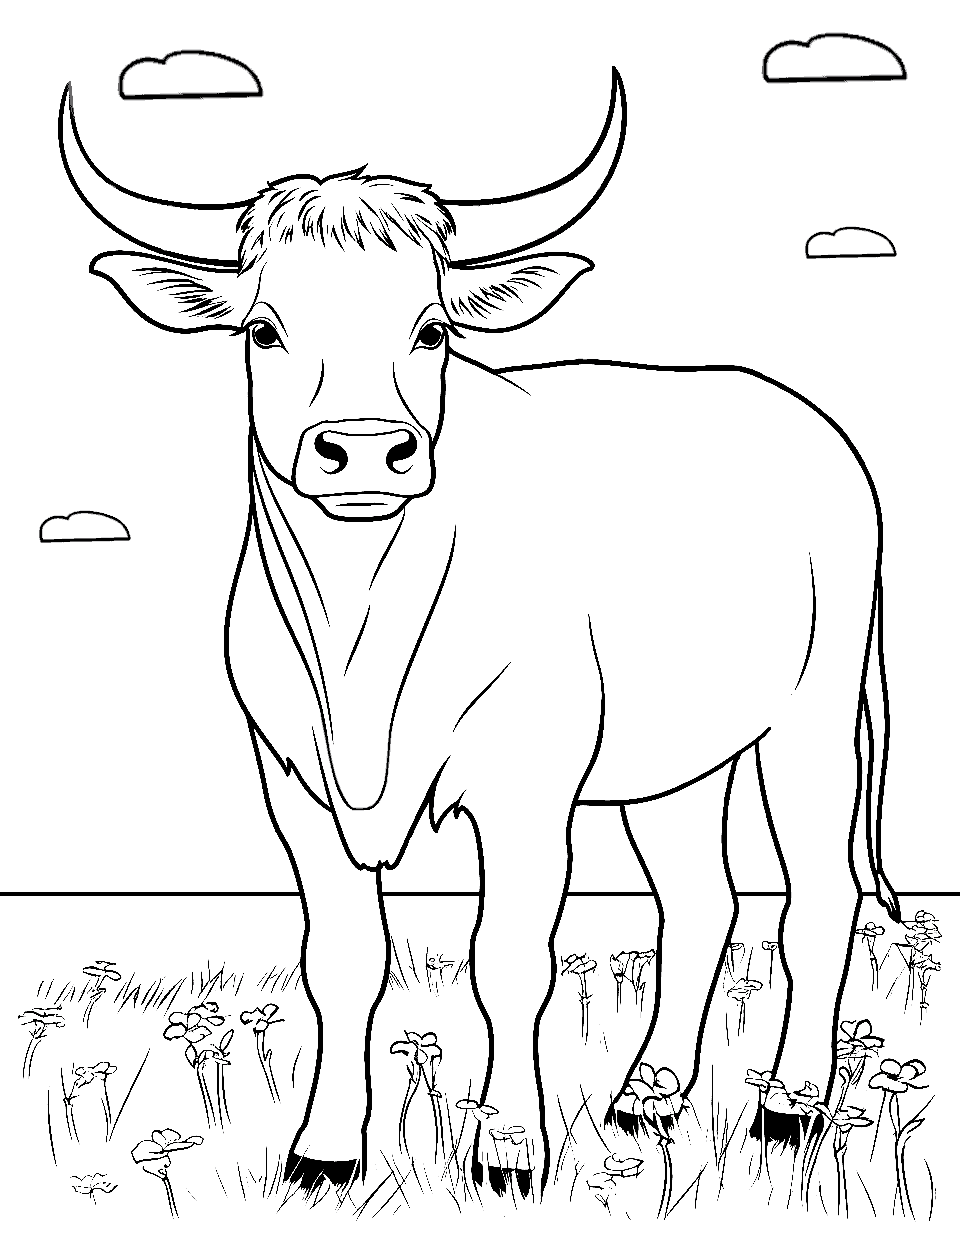 Bull in the Meadow Coloring Page - A sturdy bull standing boldly in a serene grassy meadow.